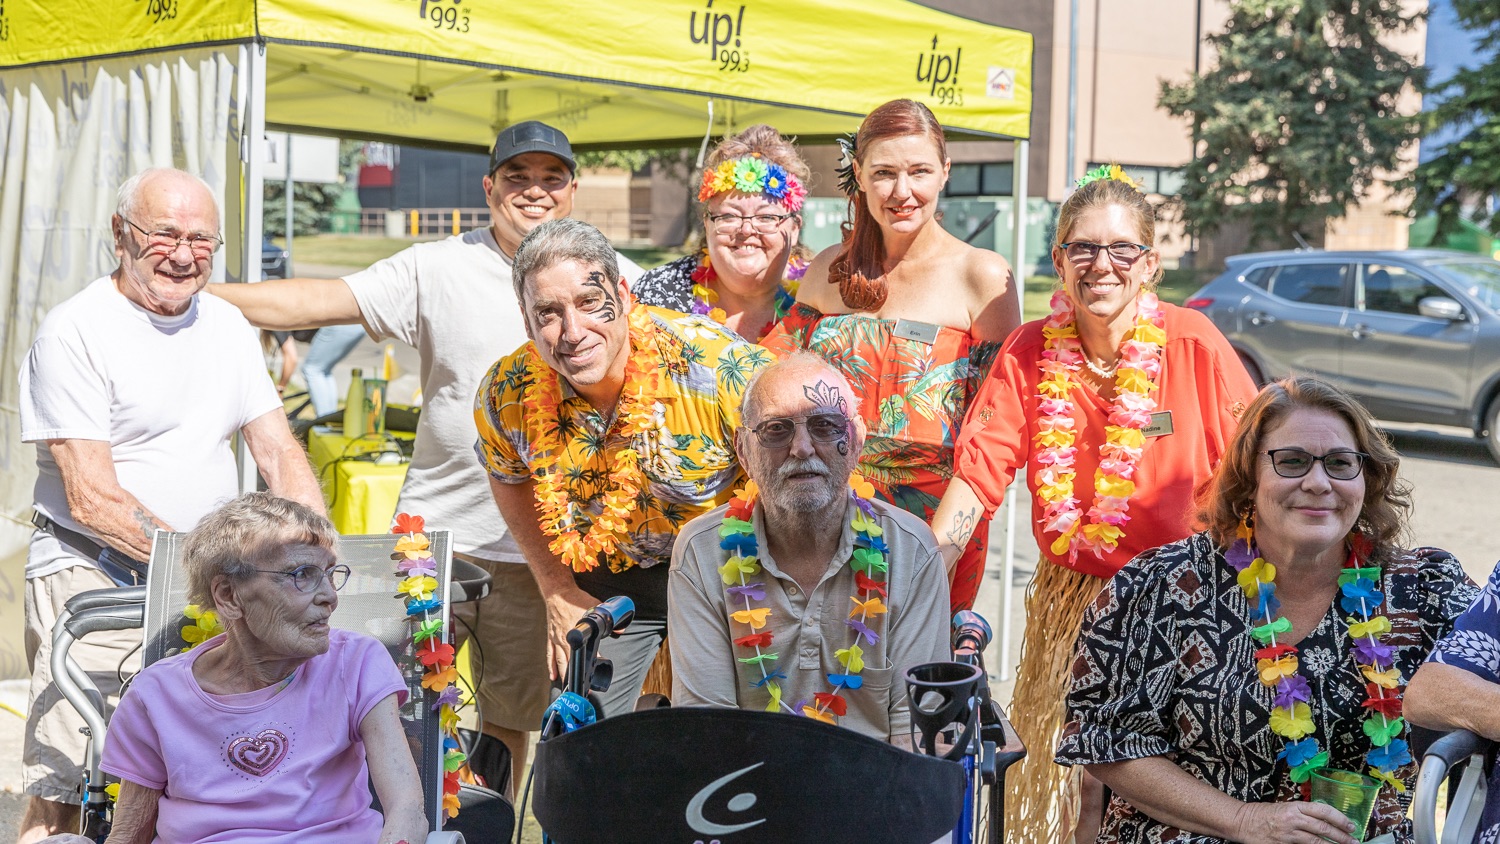 Residents and staff smiling together in their Hawaiian outfits outside a retirement home.